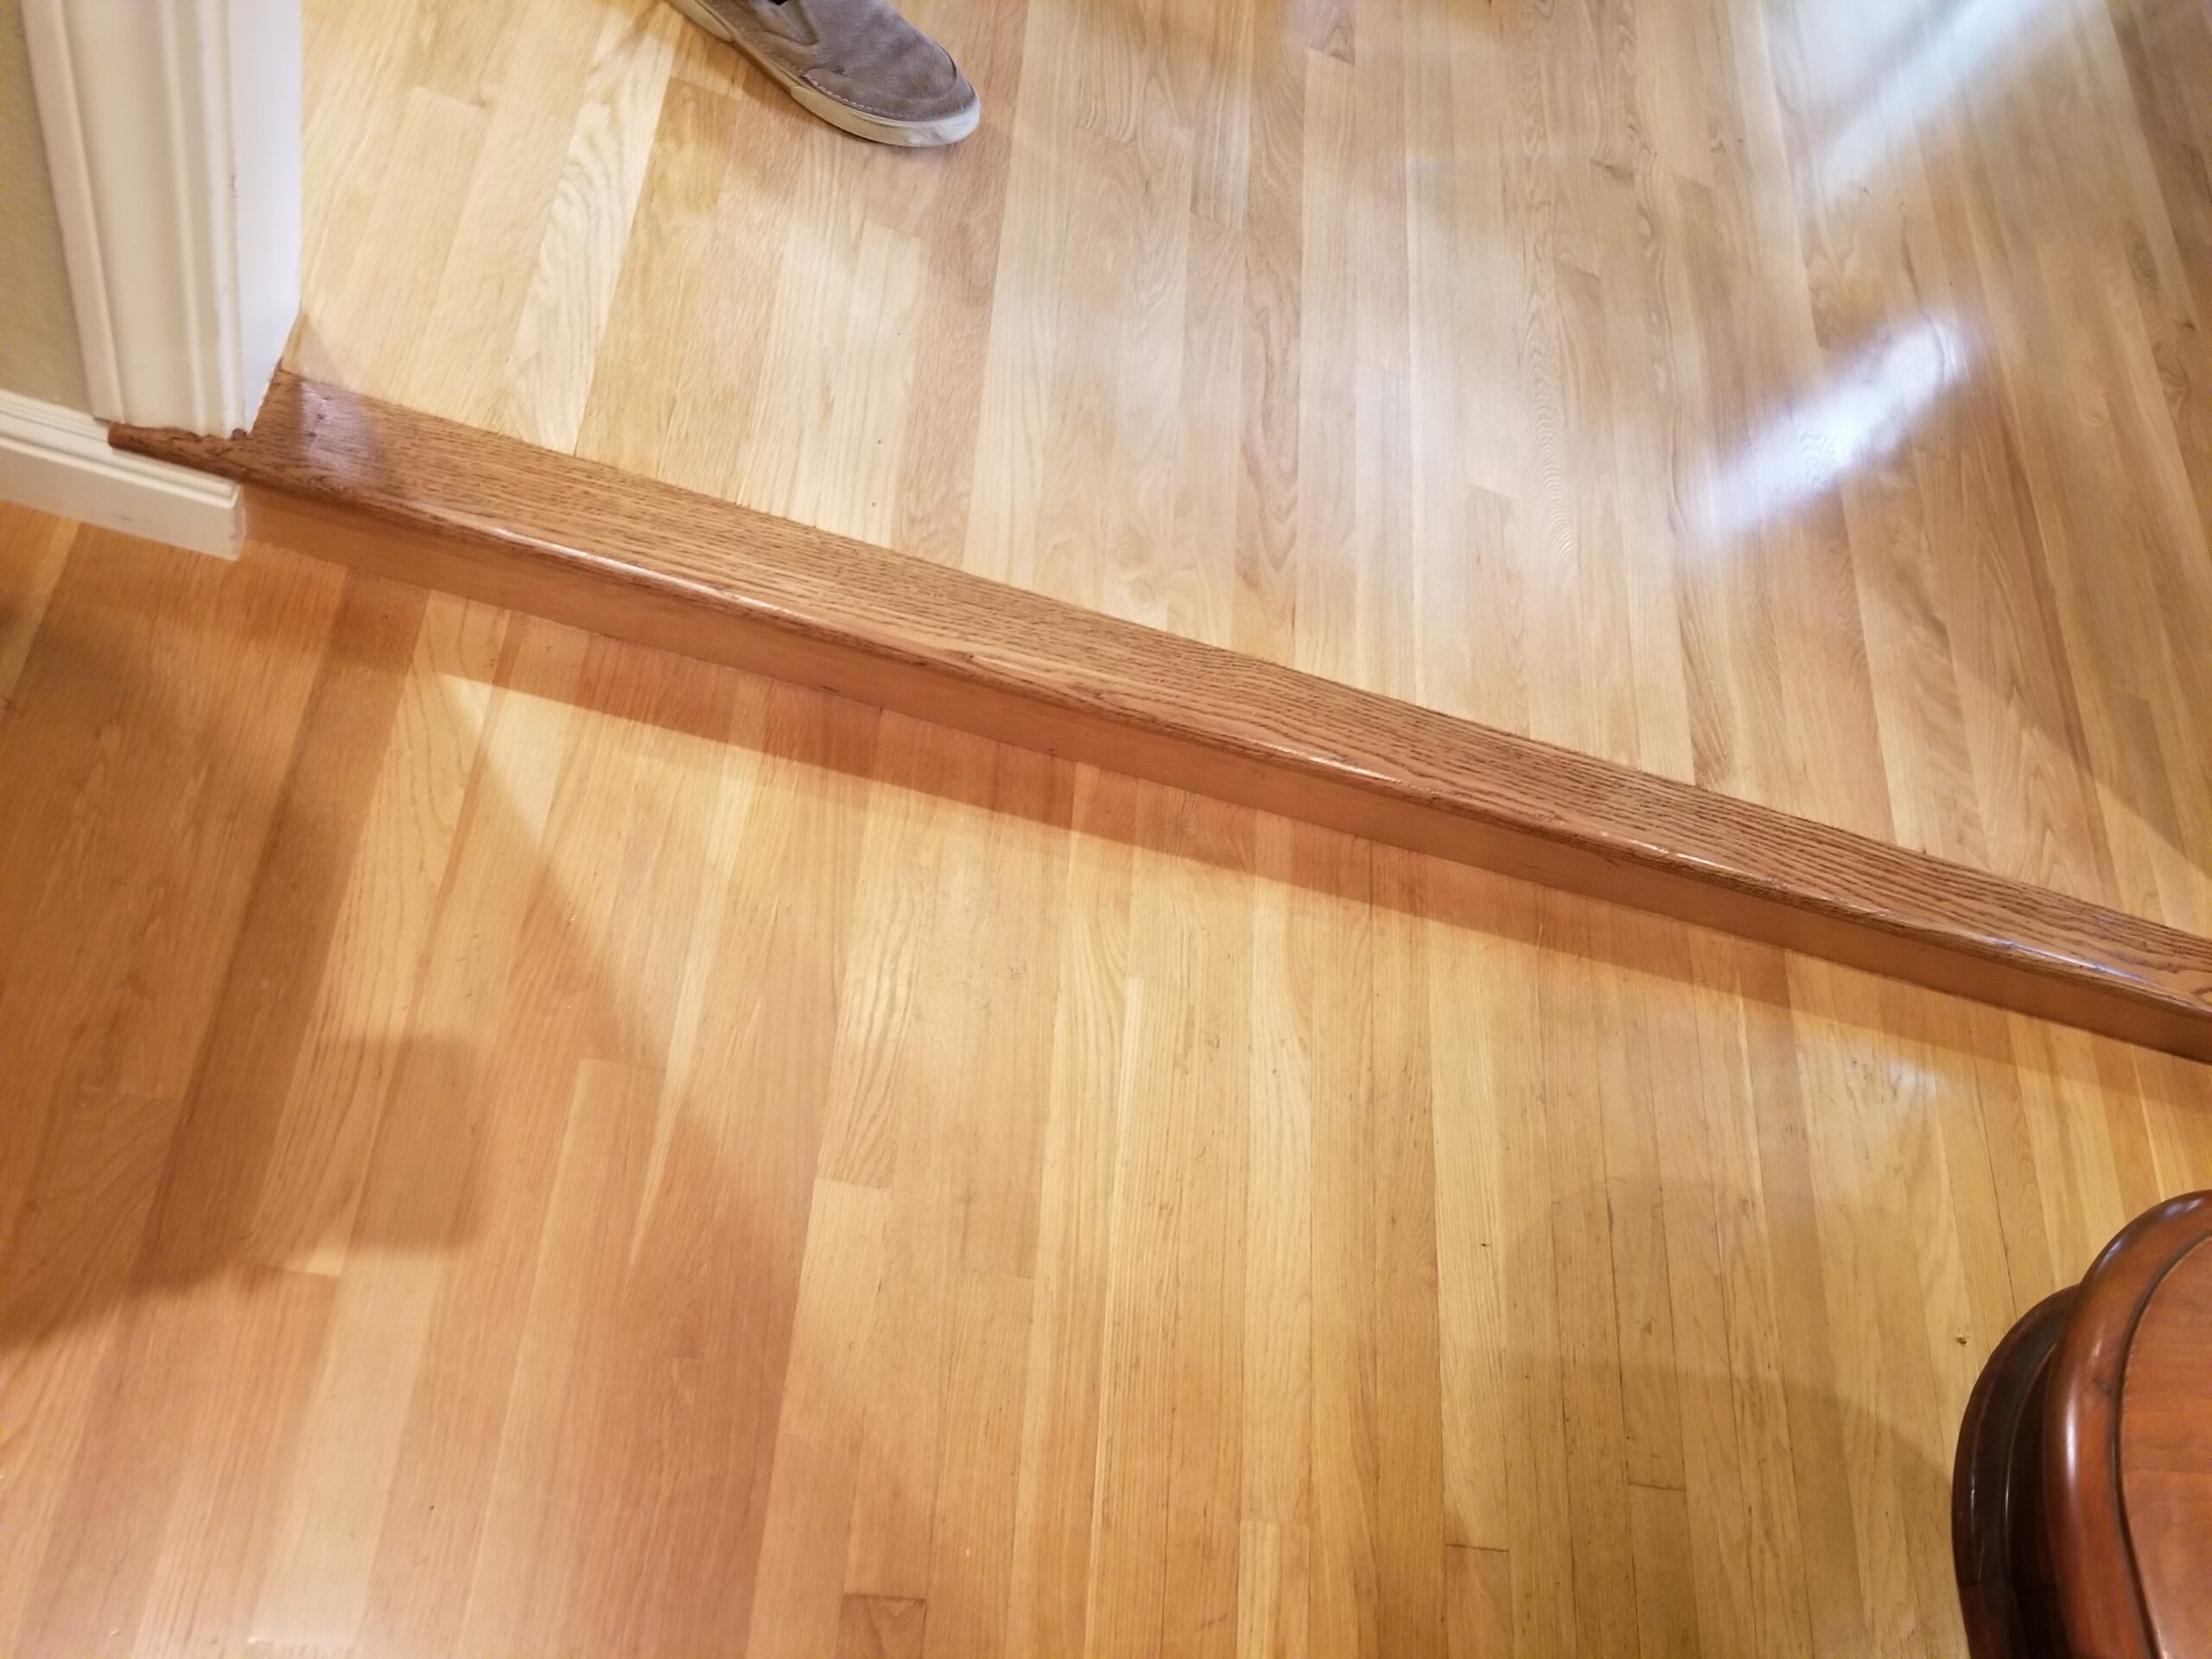 View One: Refinish of 3/4 “x 3 ¼” Red Oak floors with 3 coats of gloss water-base finish.  Job also included 